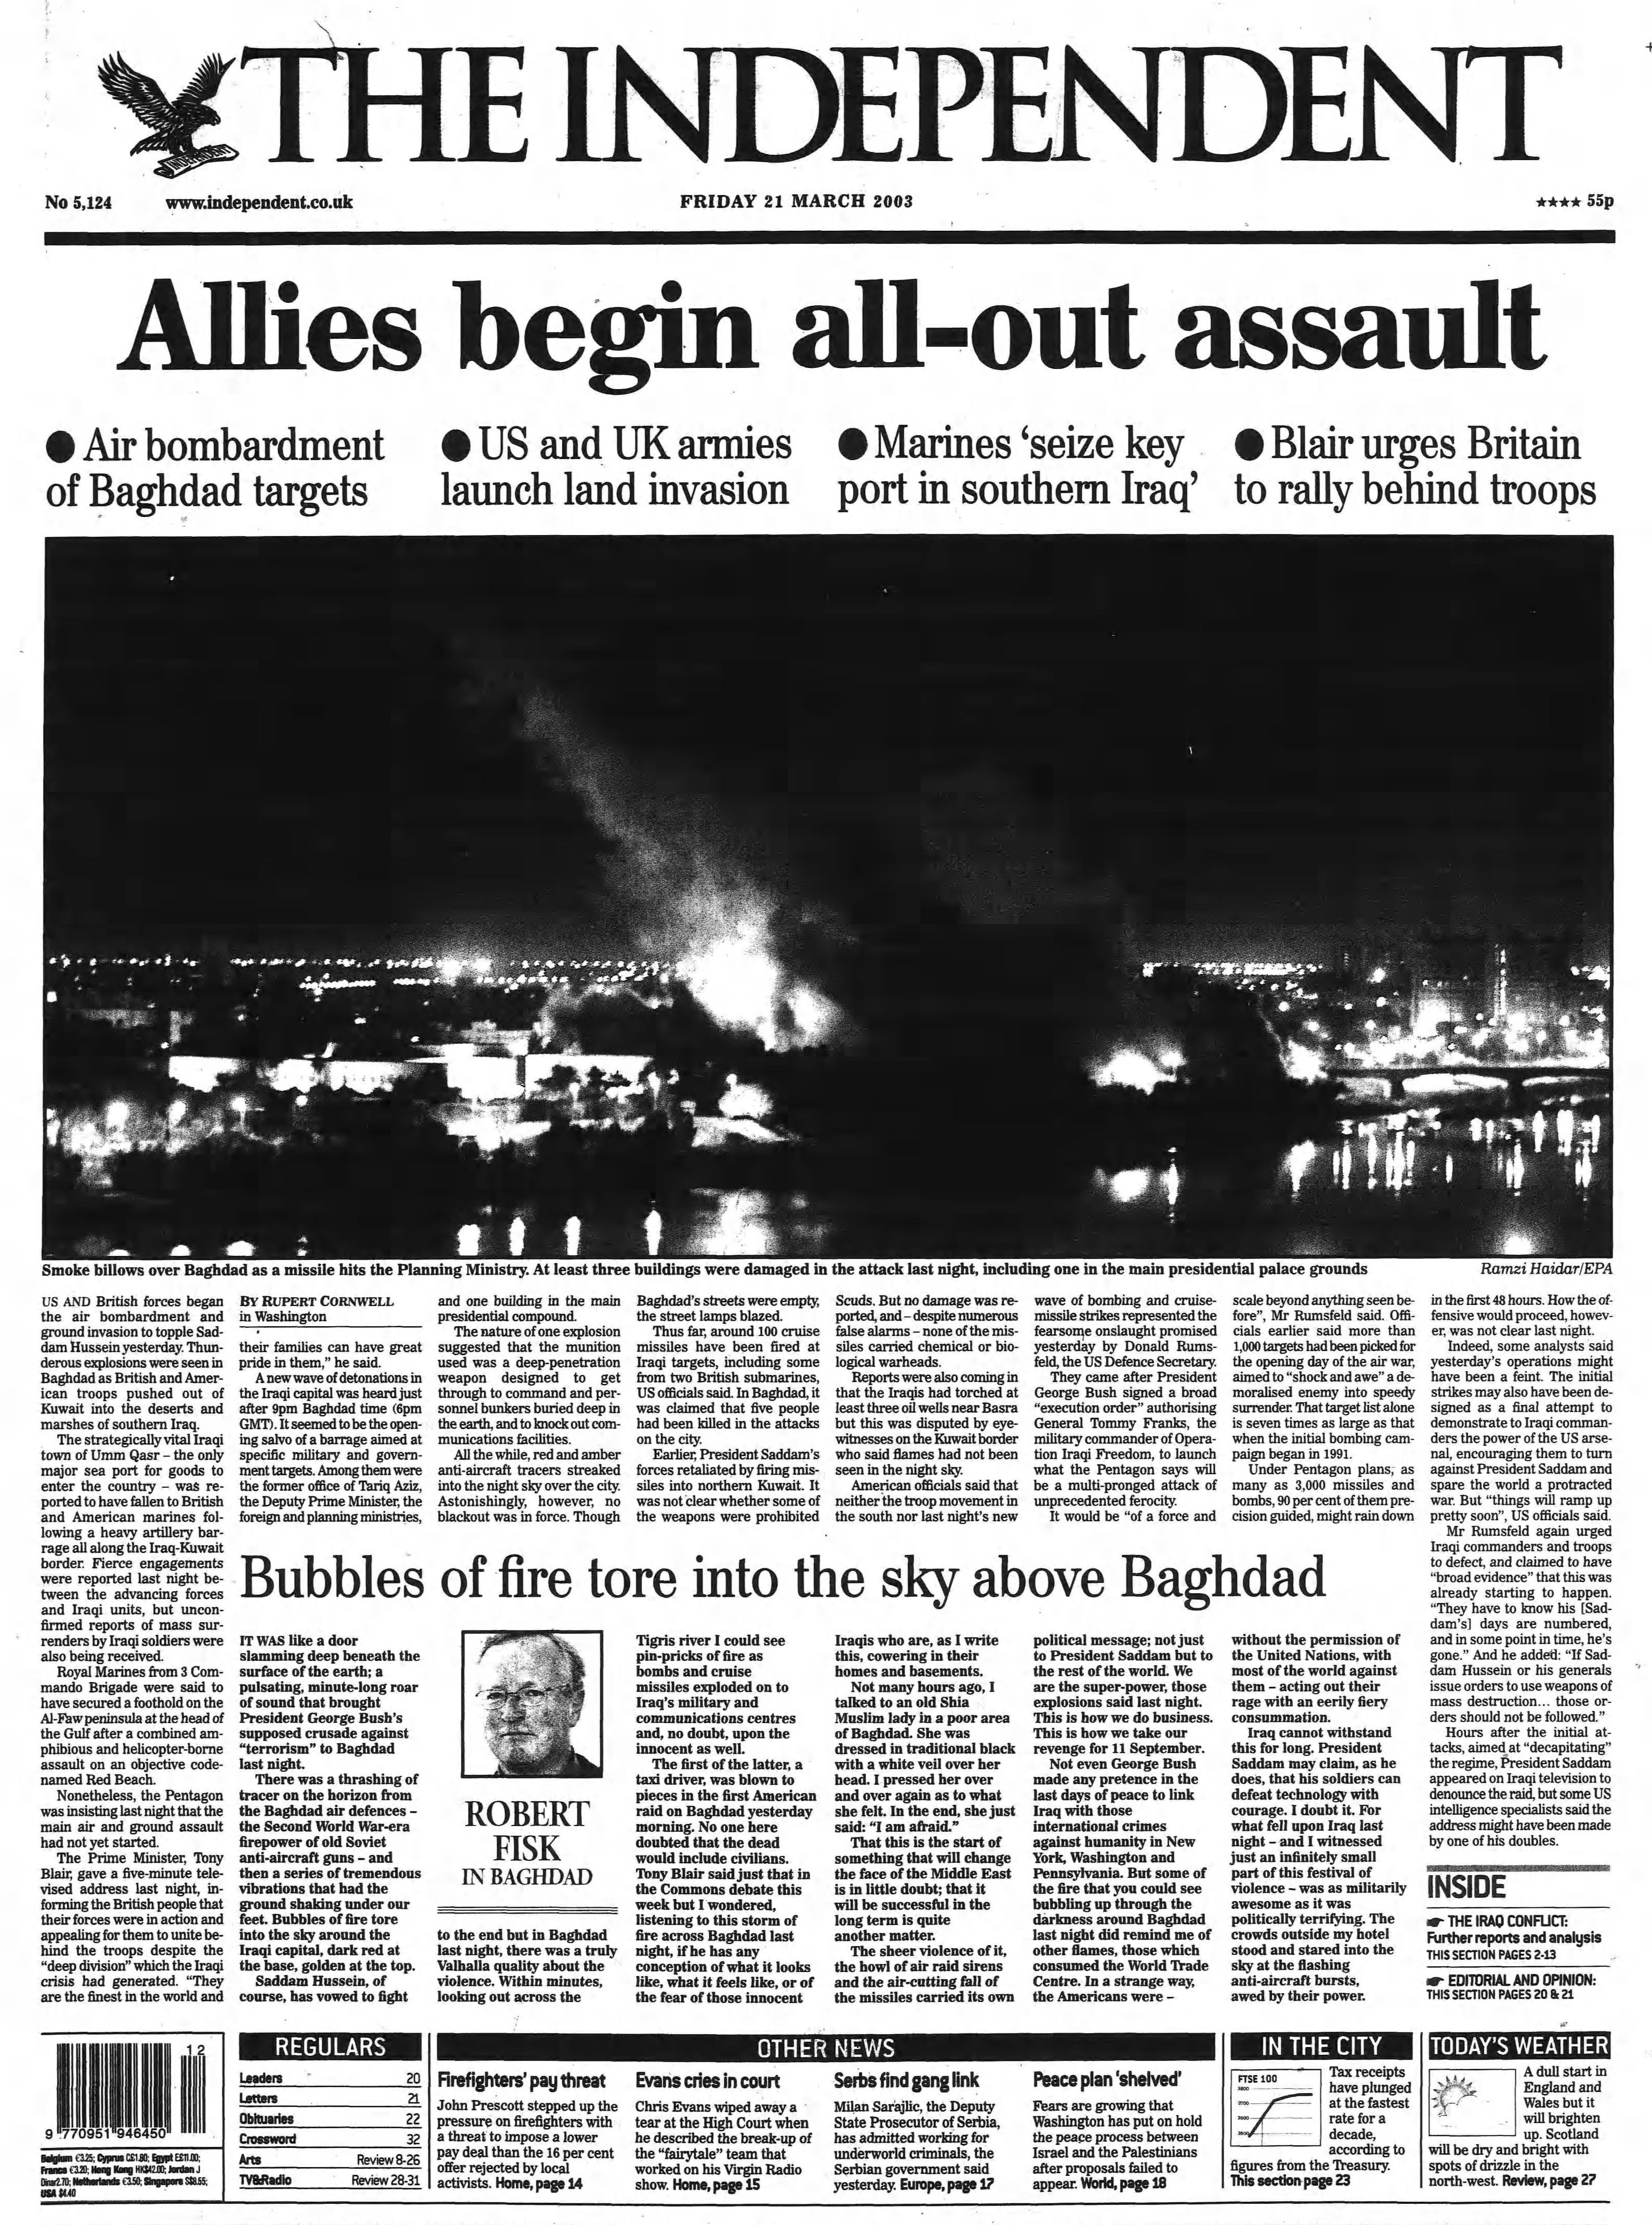 The Independent front page on 21 March 2003